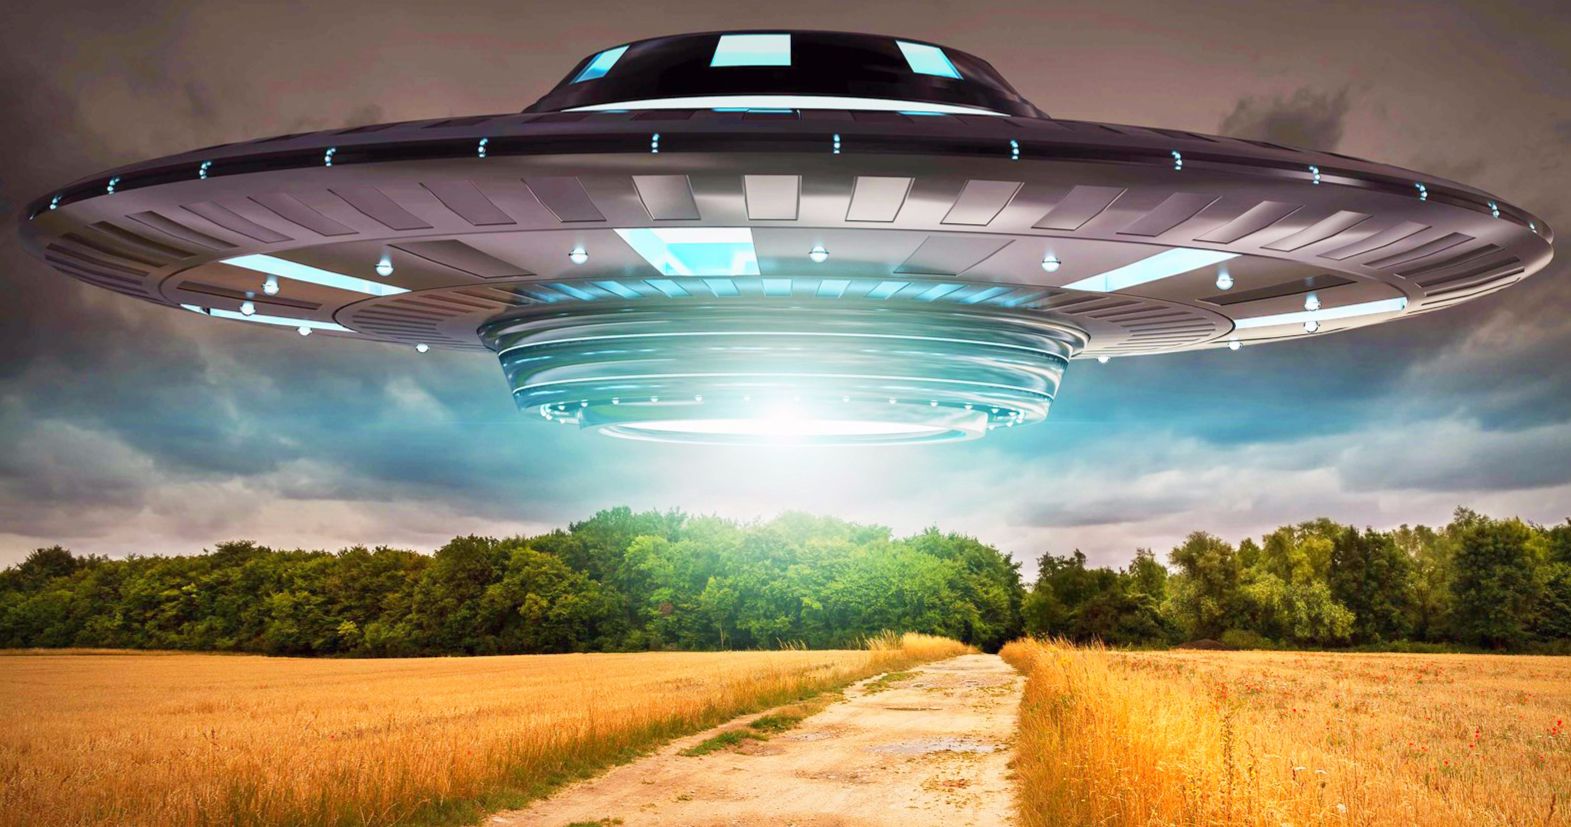 Was a Real UFO Caught on Video at Skinwalker Ranch During History Channel Live Feed?